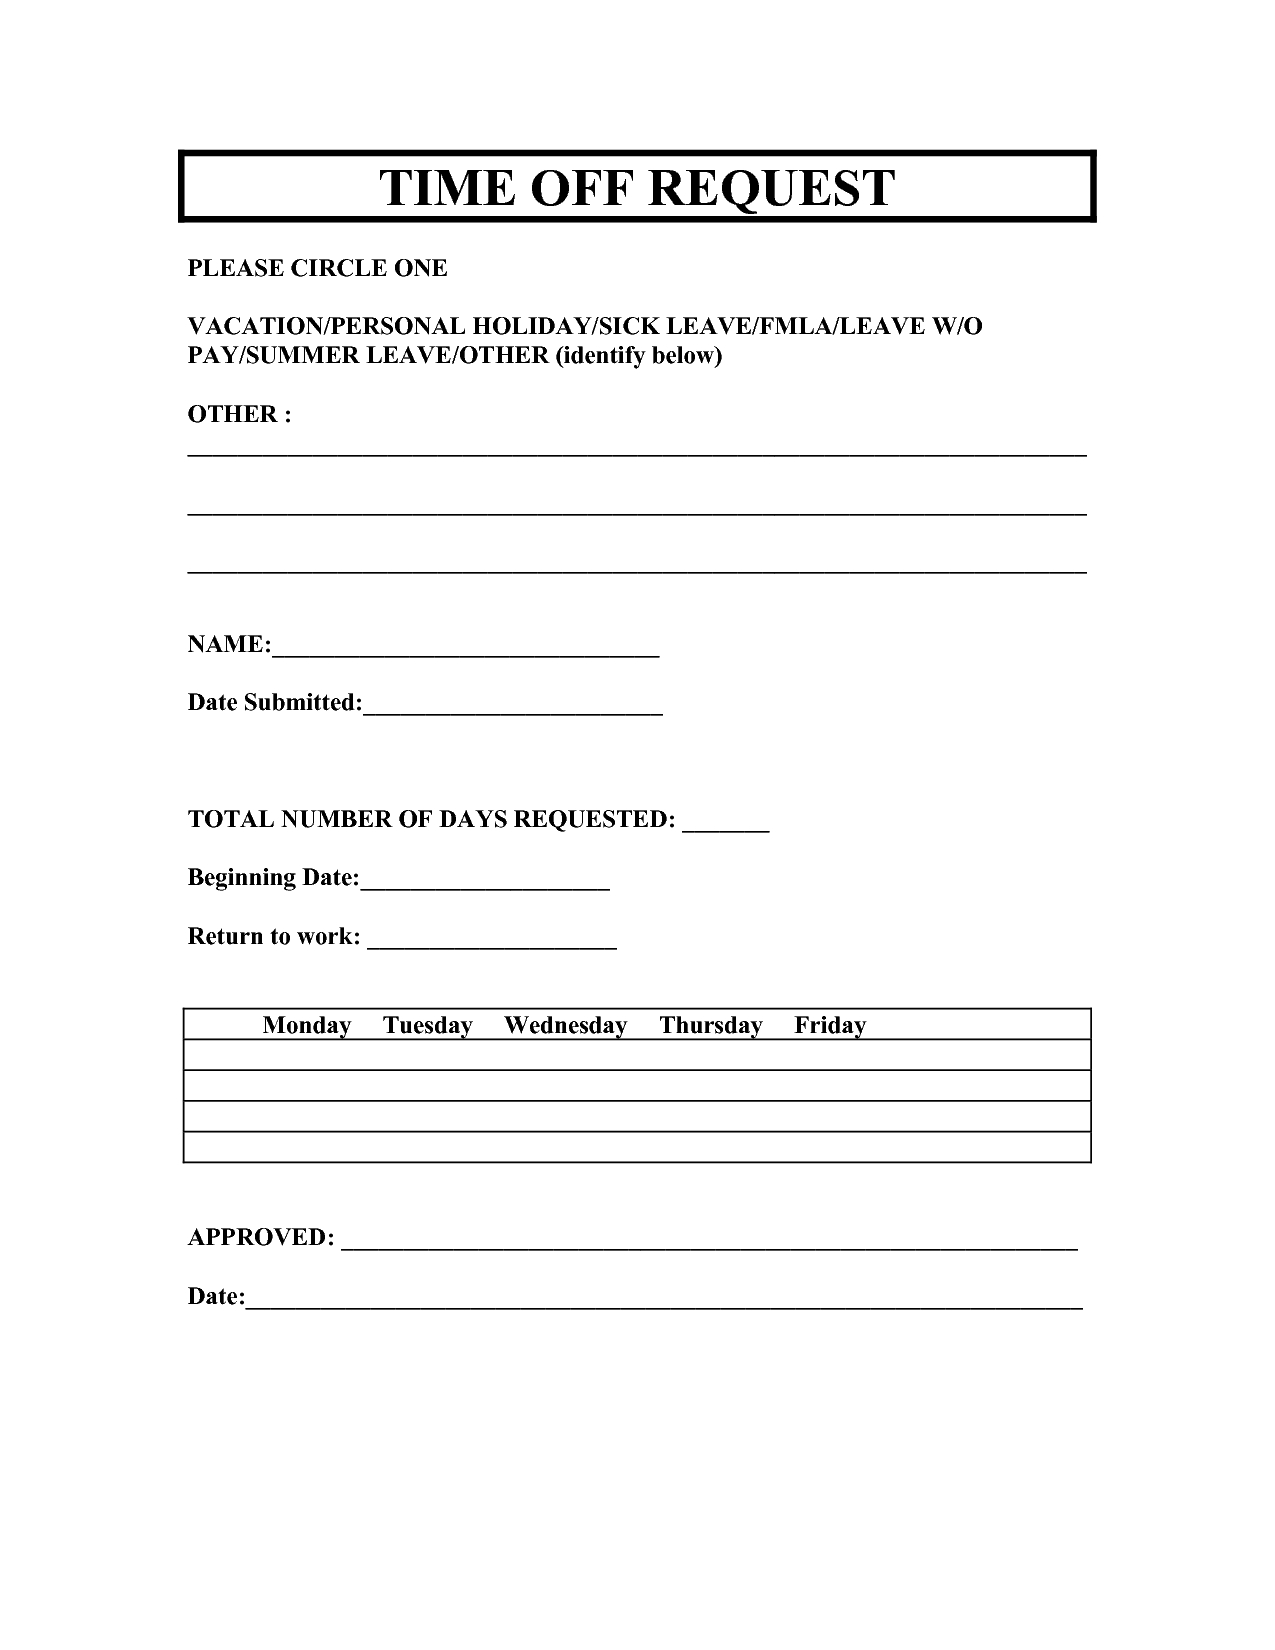 Vacation Request Forms 2014 Free Printable | Printable